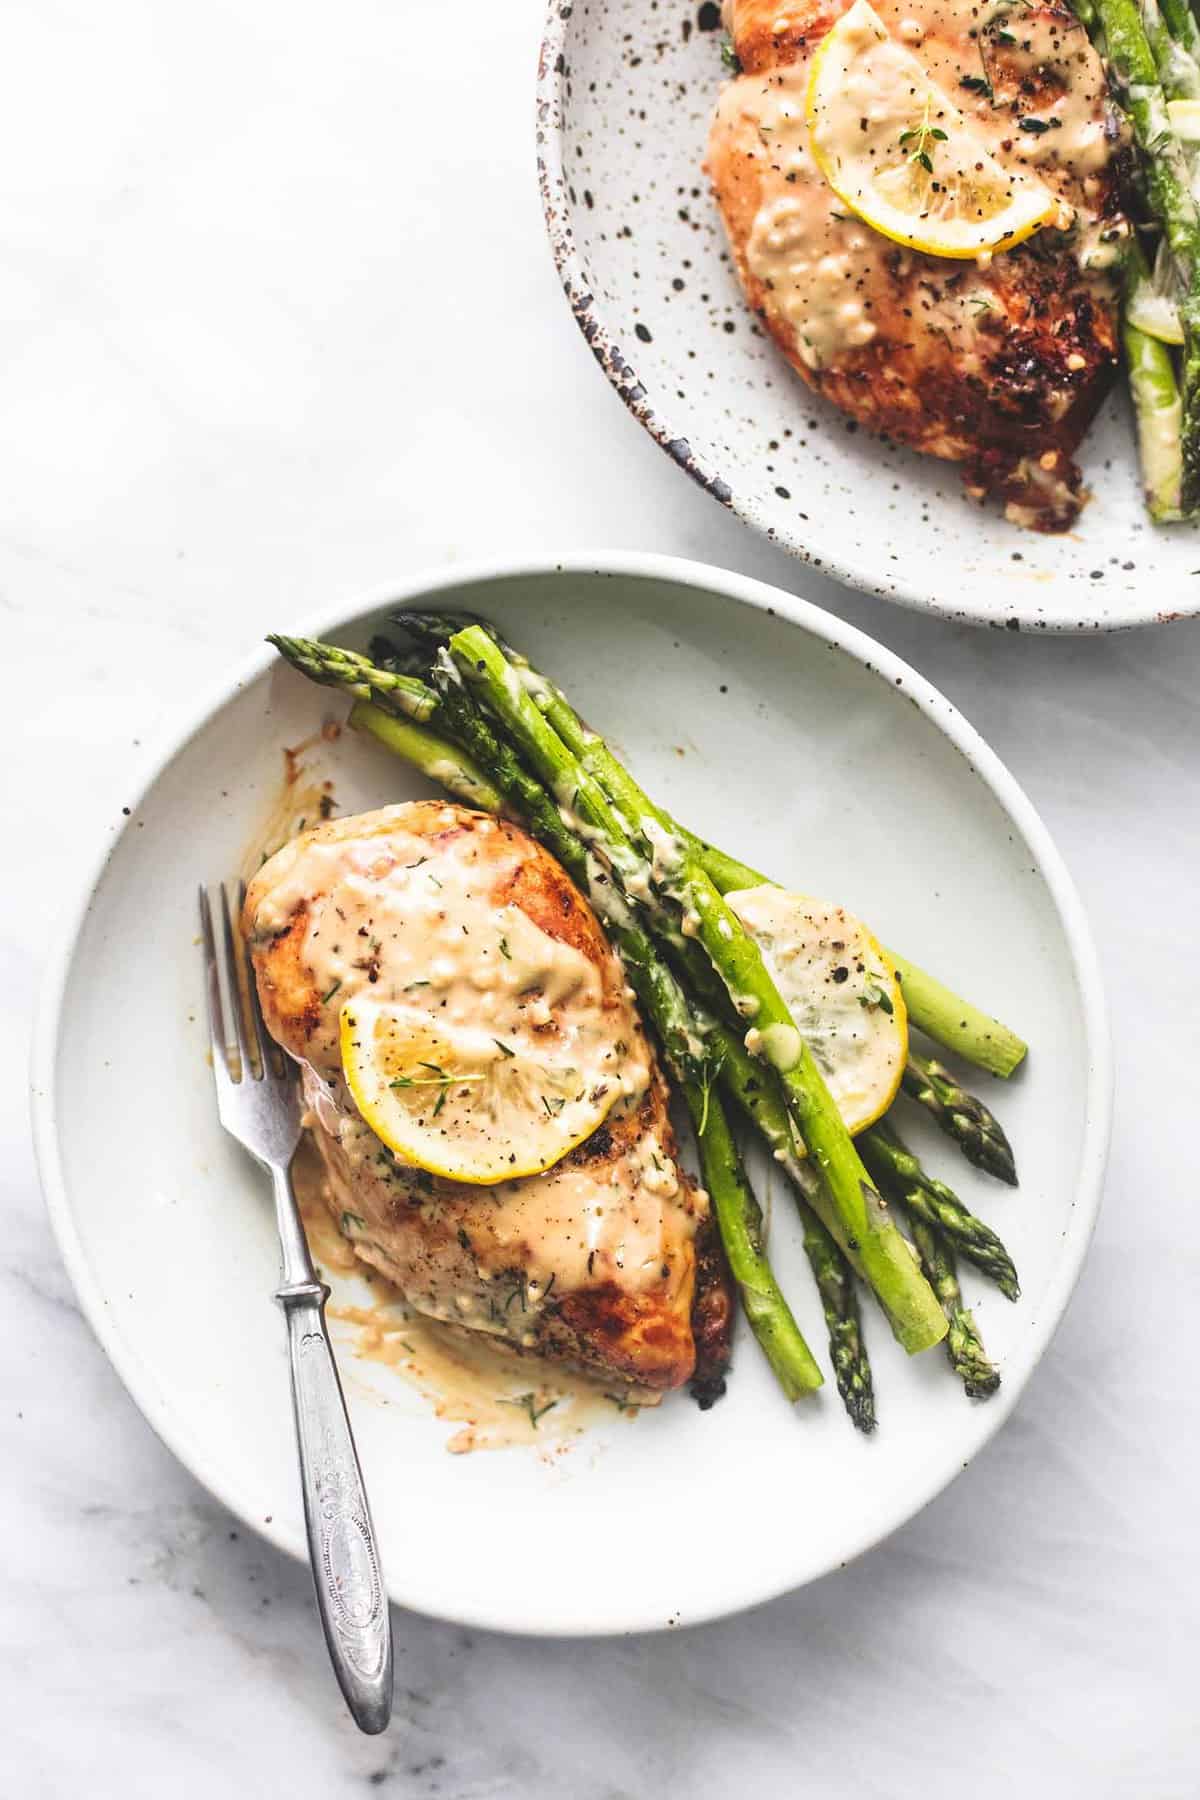 top view of creamy lemon chicken and asparagus with a fork on a plate with another plate full on the side.